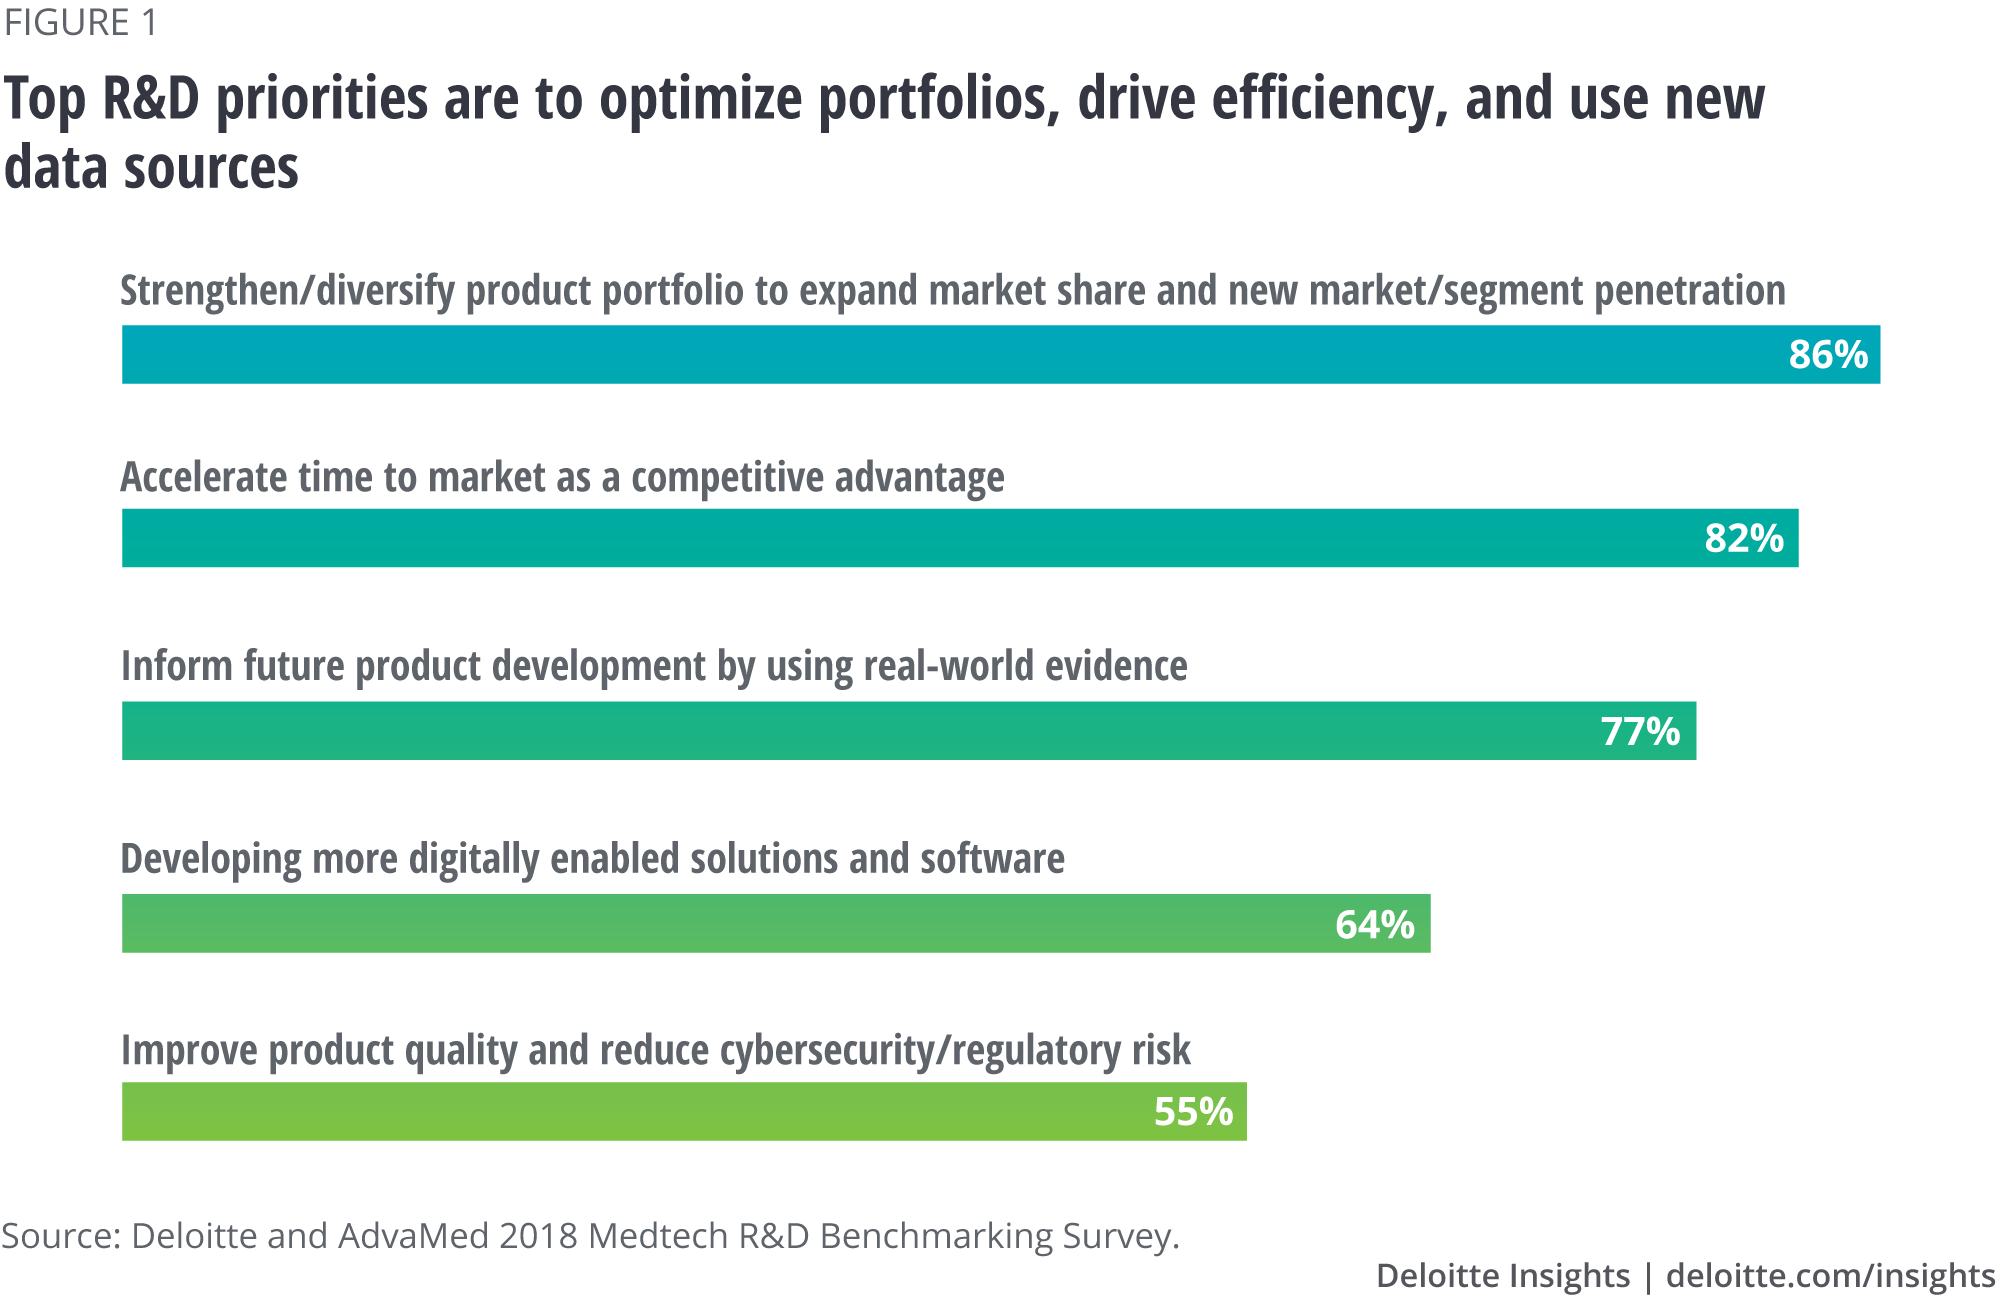 Top R&D priorities are to optimize portfolios, drive efficiency, and use new data sources